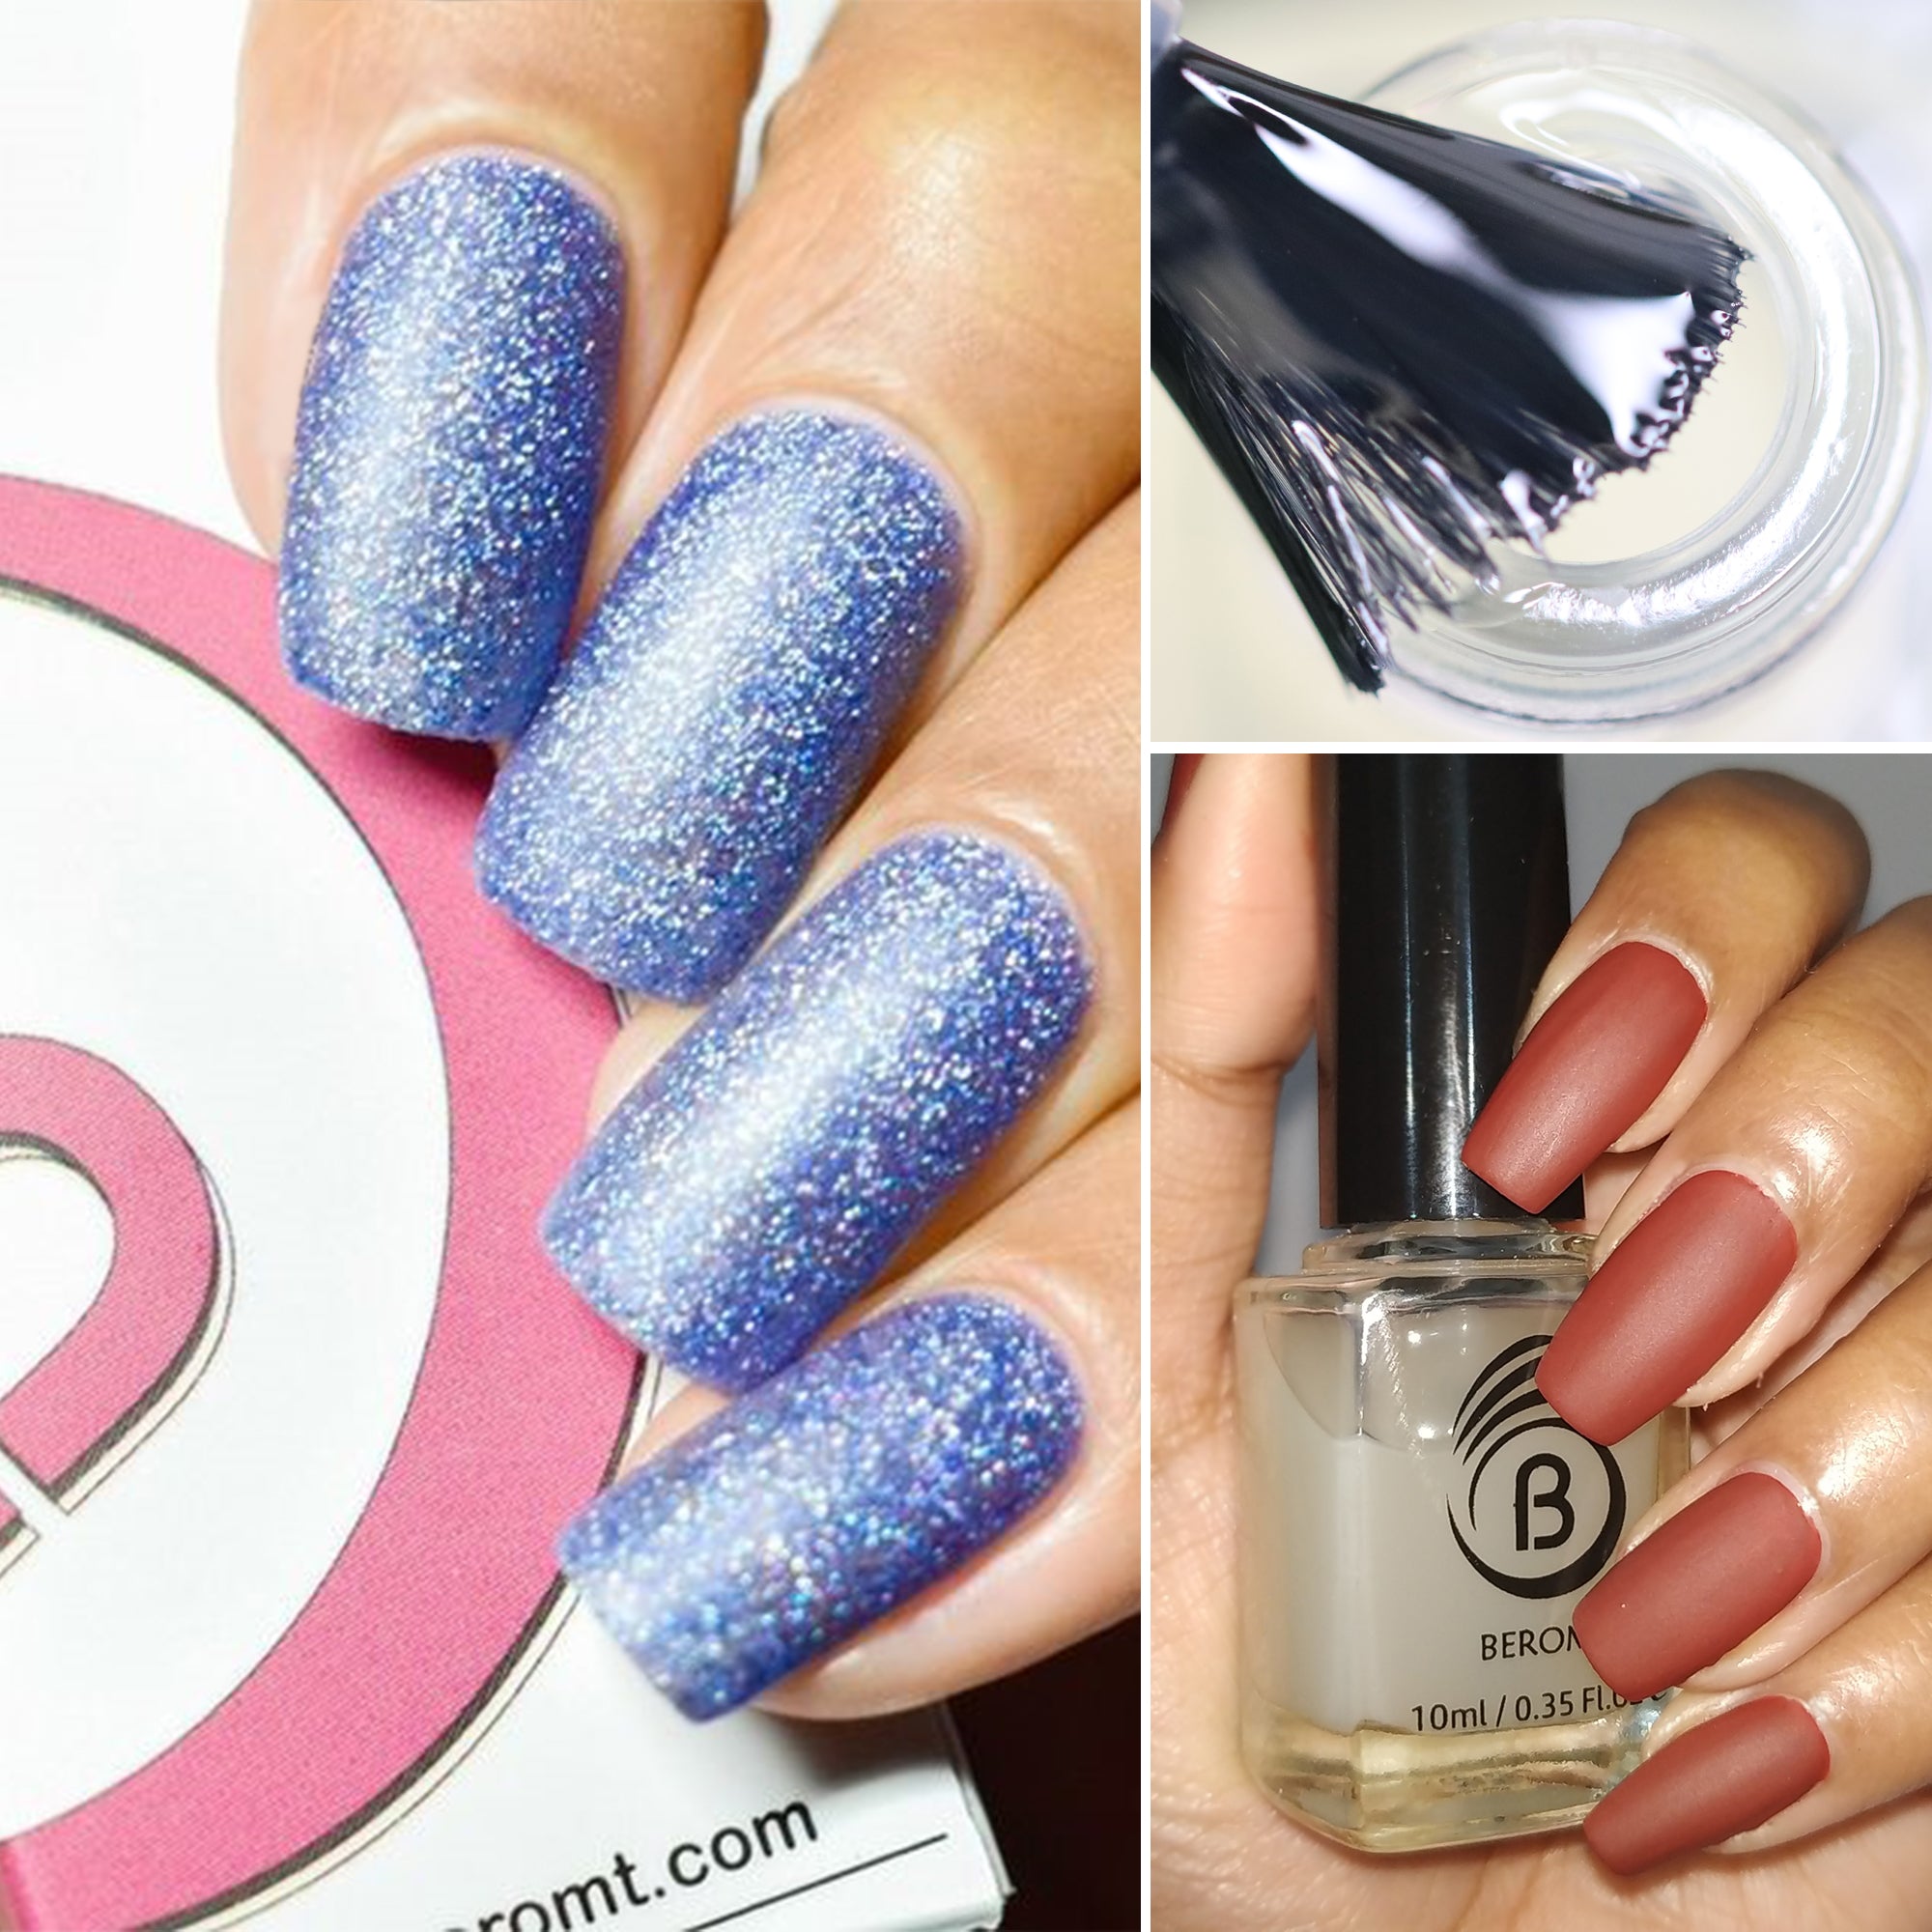 58 Elegant Looks For Matte Nails Every Girl Will Want To Copy